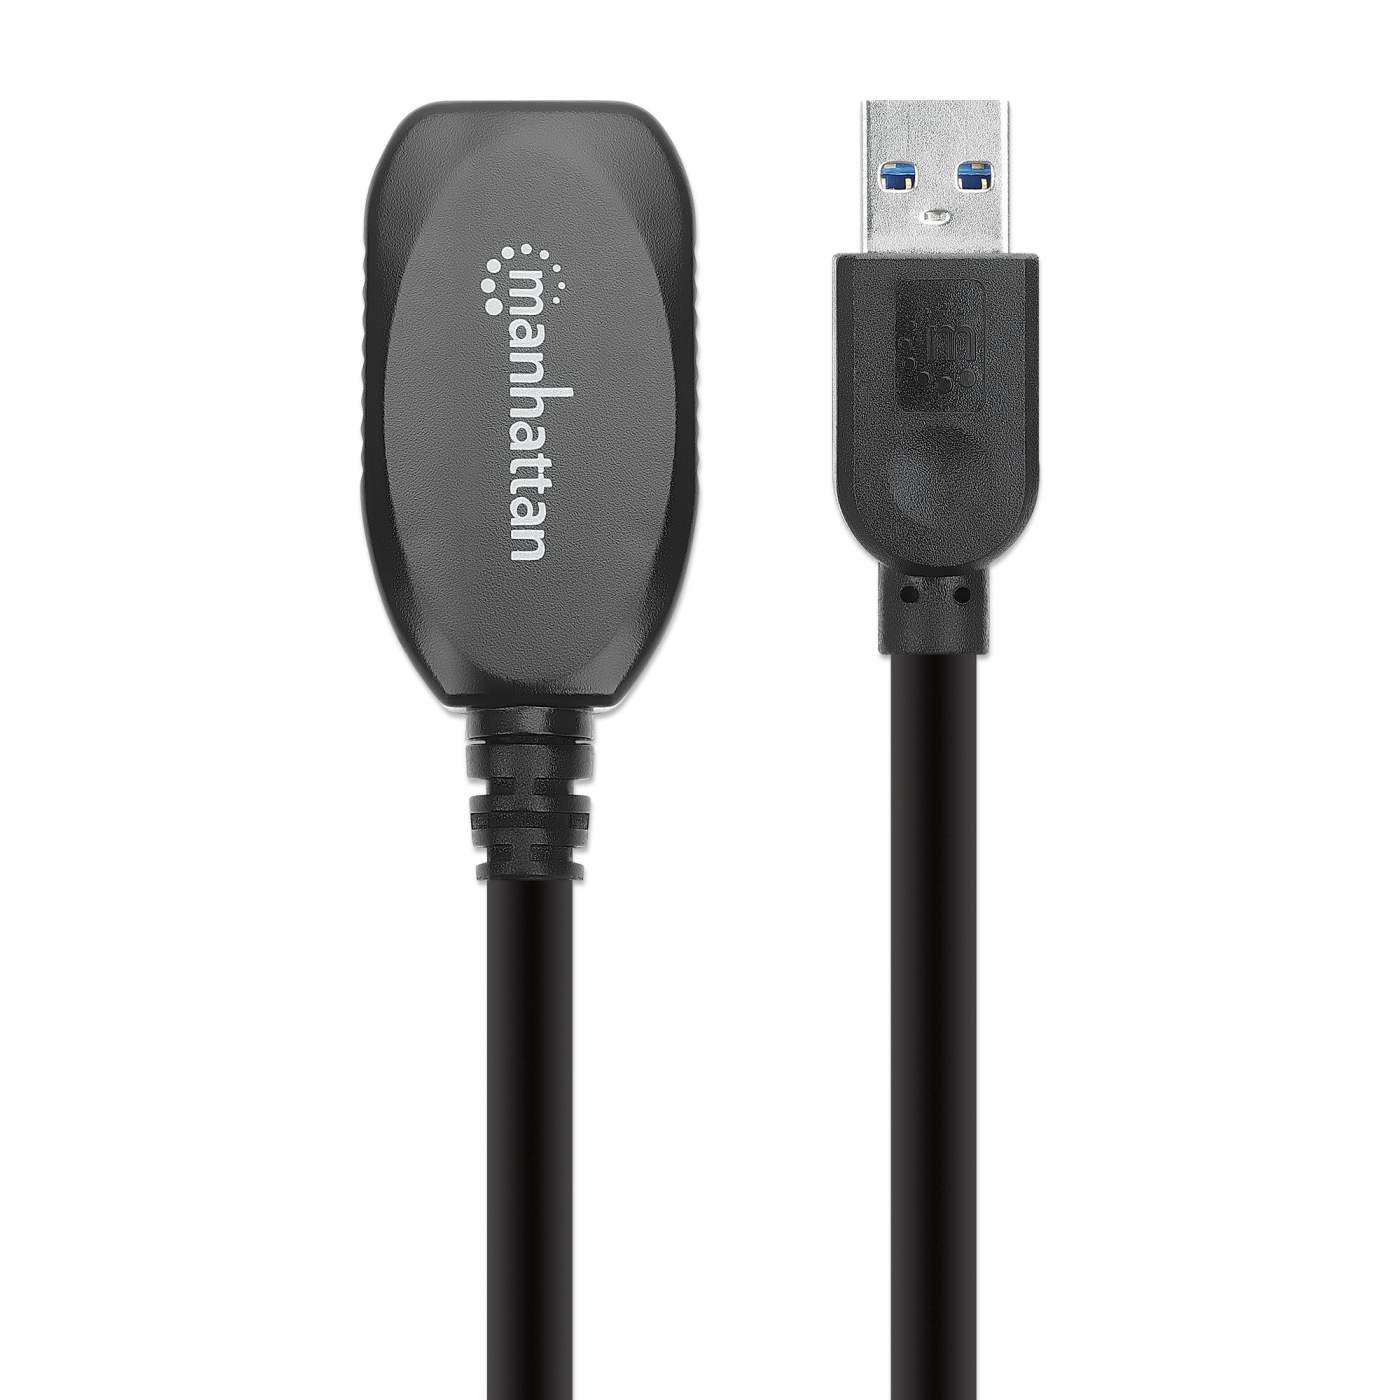 Manhattan SuperSpeed USB 3.0 A Male-A Female Active Extension Cable, 16